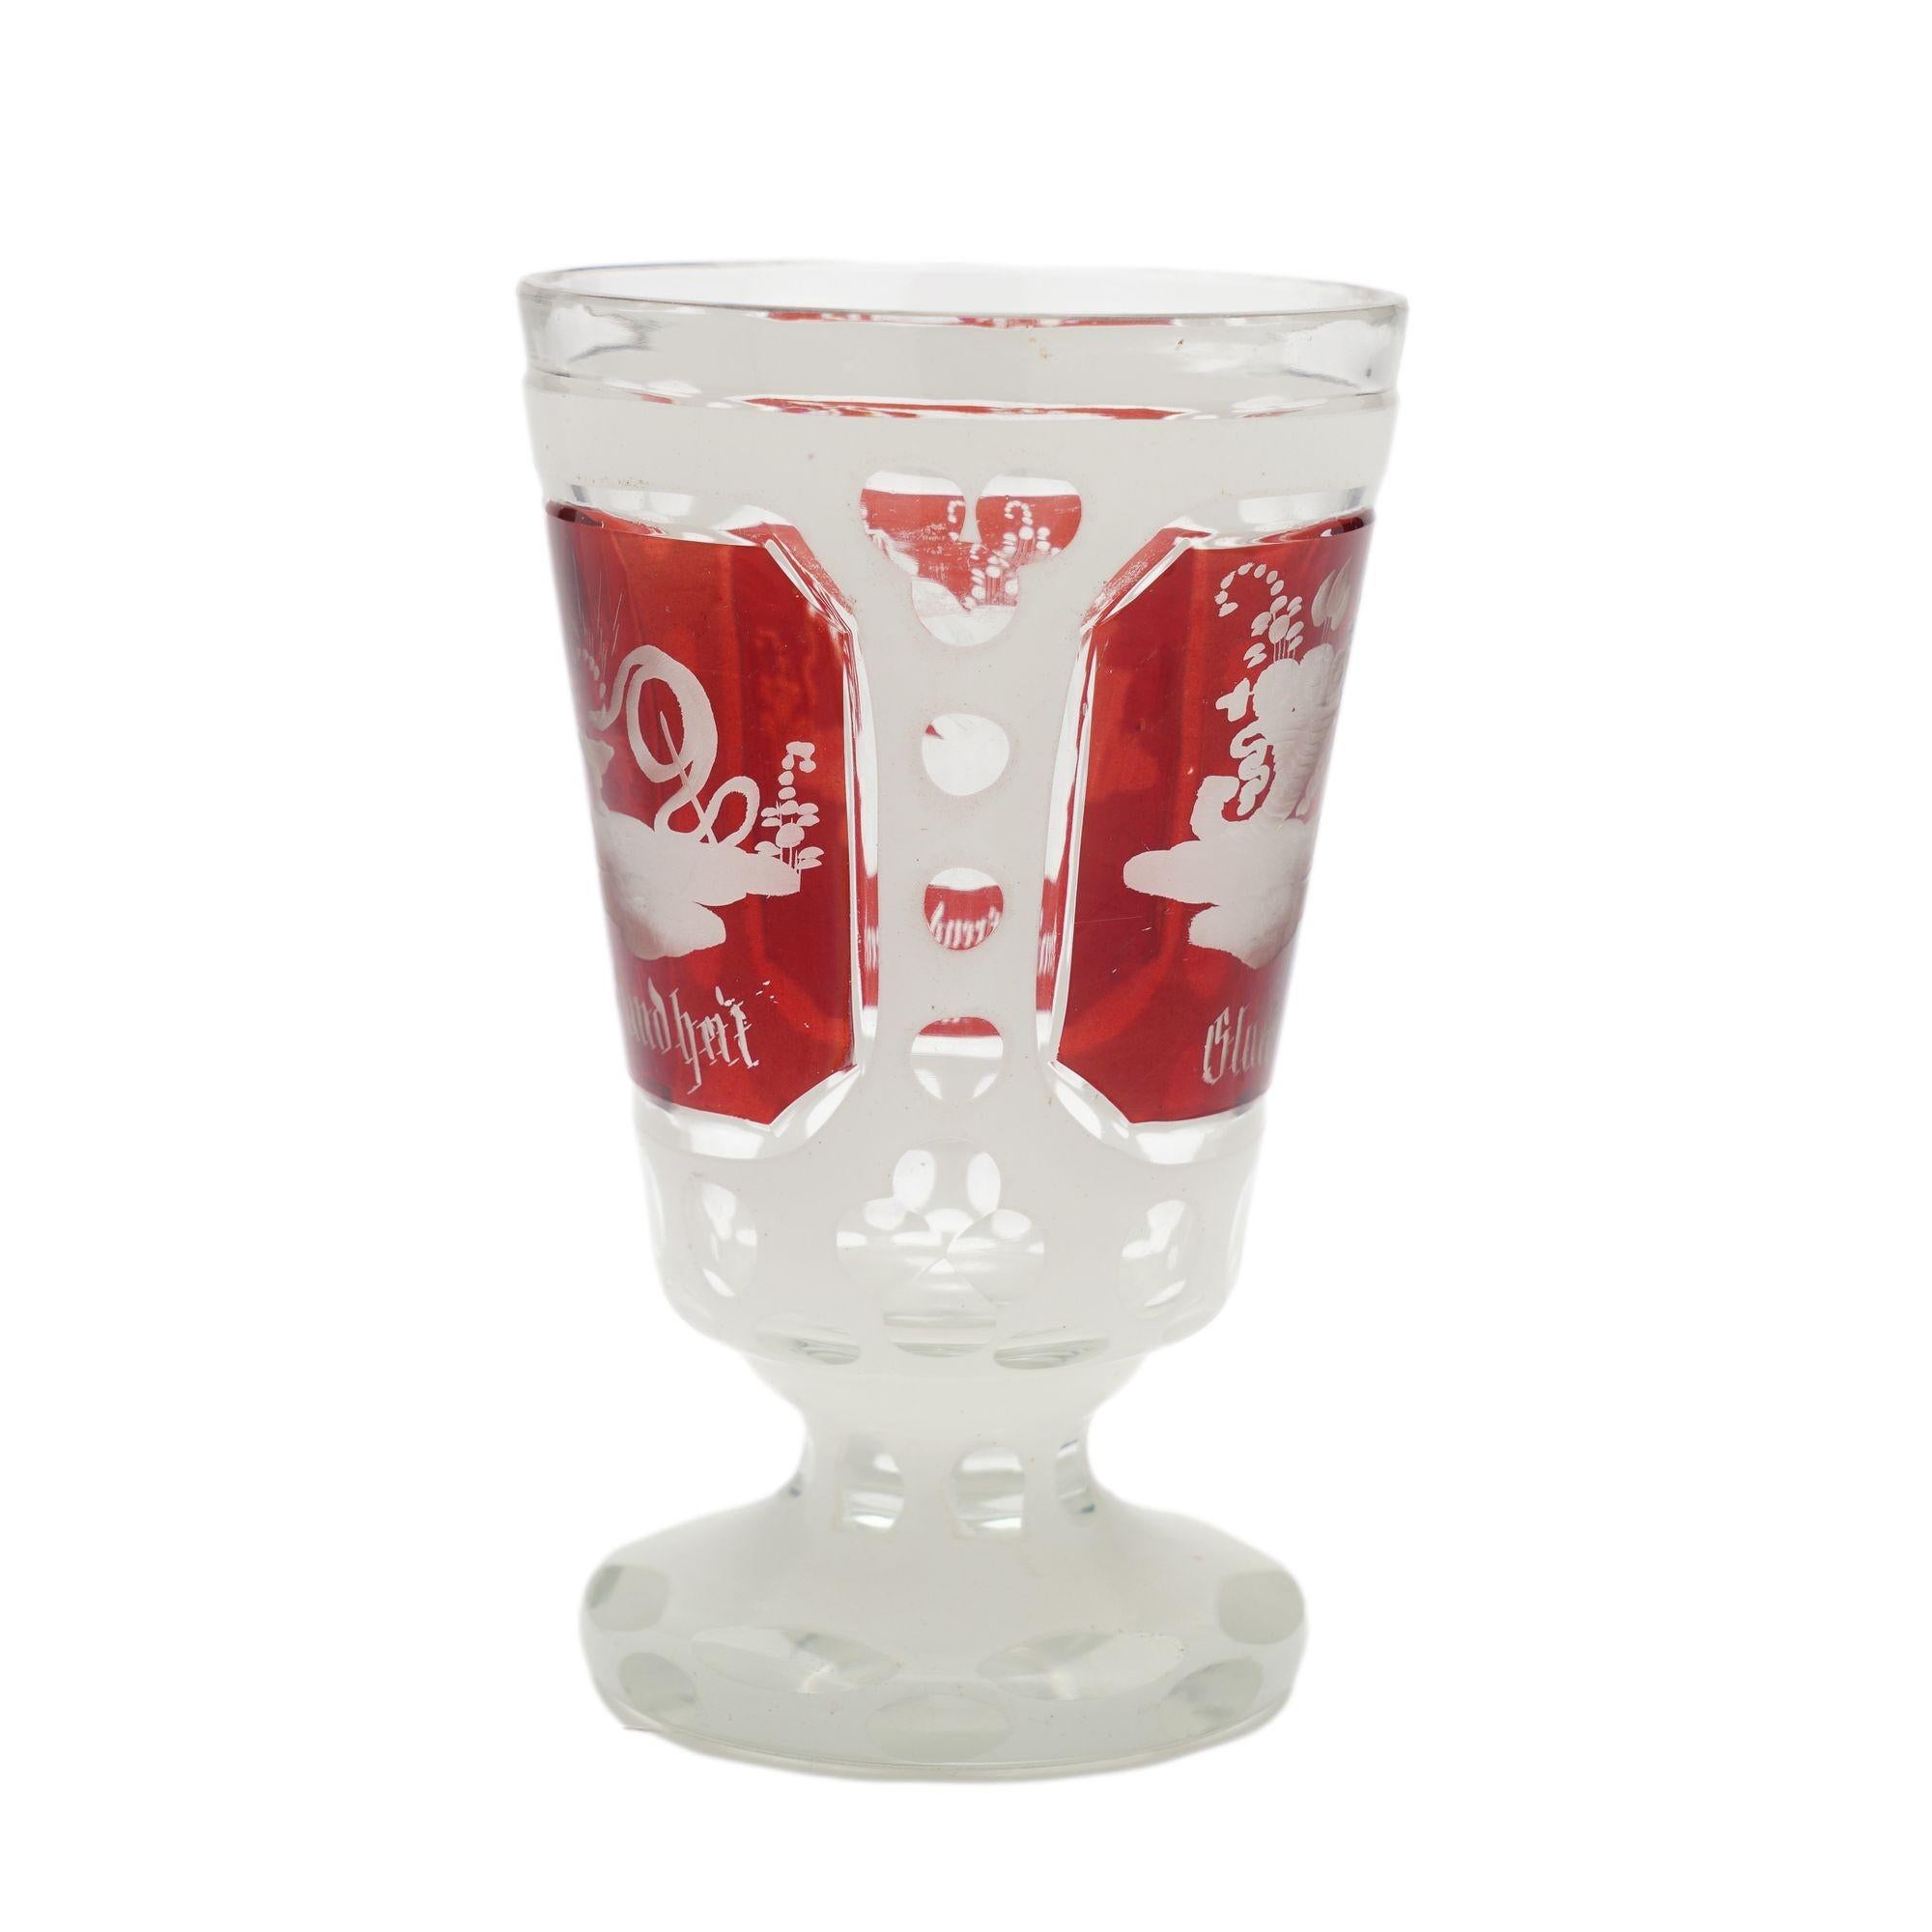 Clear blown spa glass with a cut white enamel overlay and three ruby flashed panels etched with trophies. The cup rests on a pedestal base with circular foot. Spa glasses were created for visitors to the mineral water spas to drink the spring waters